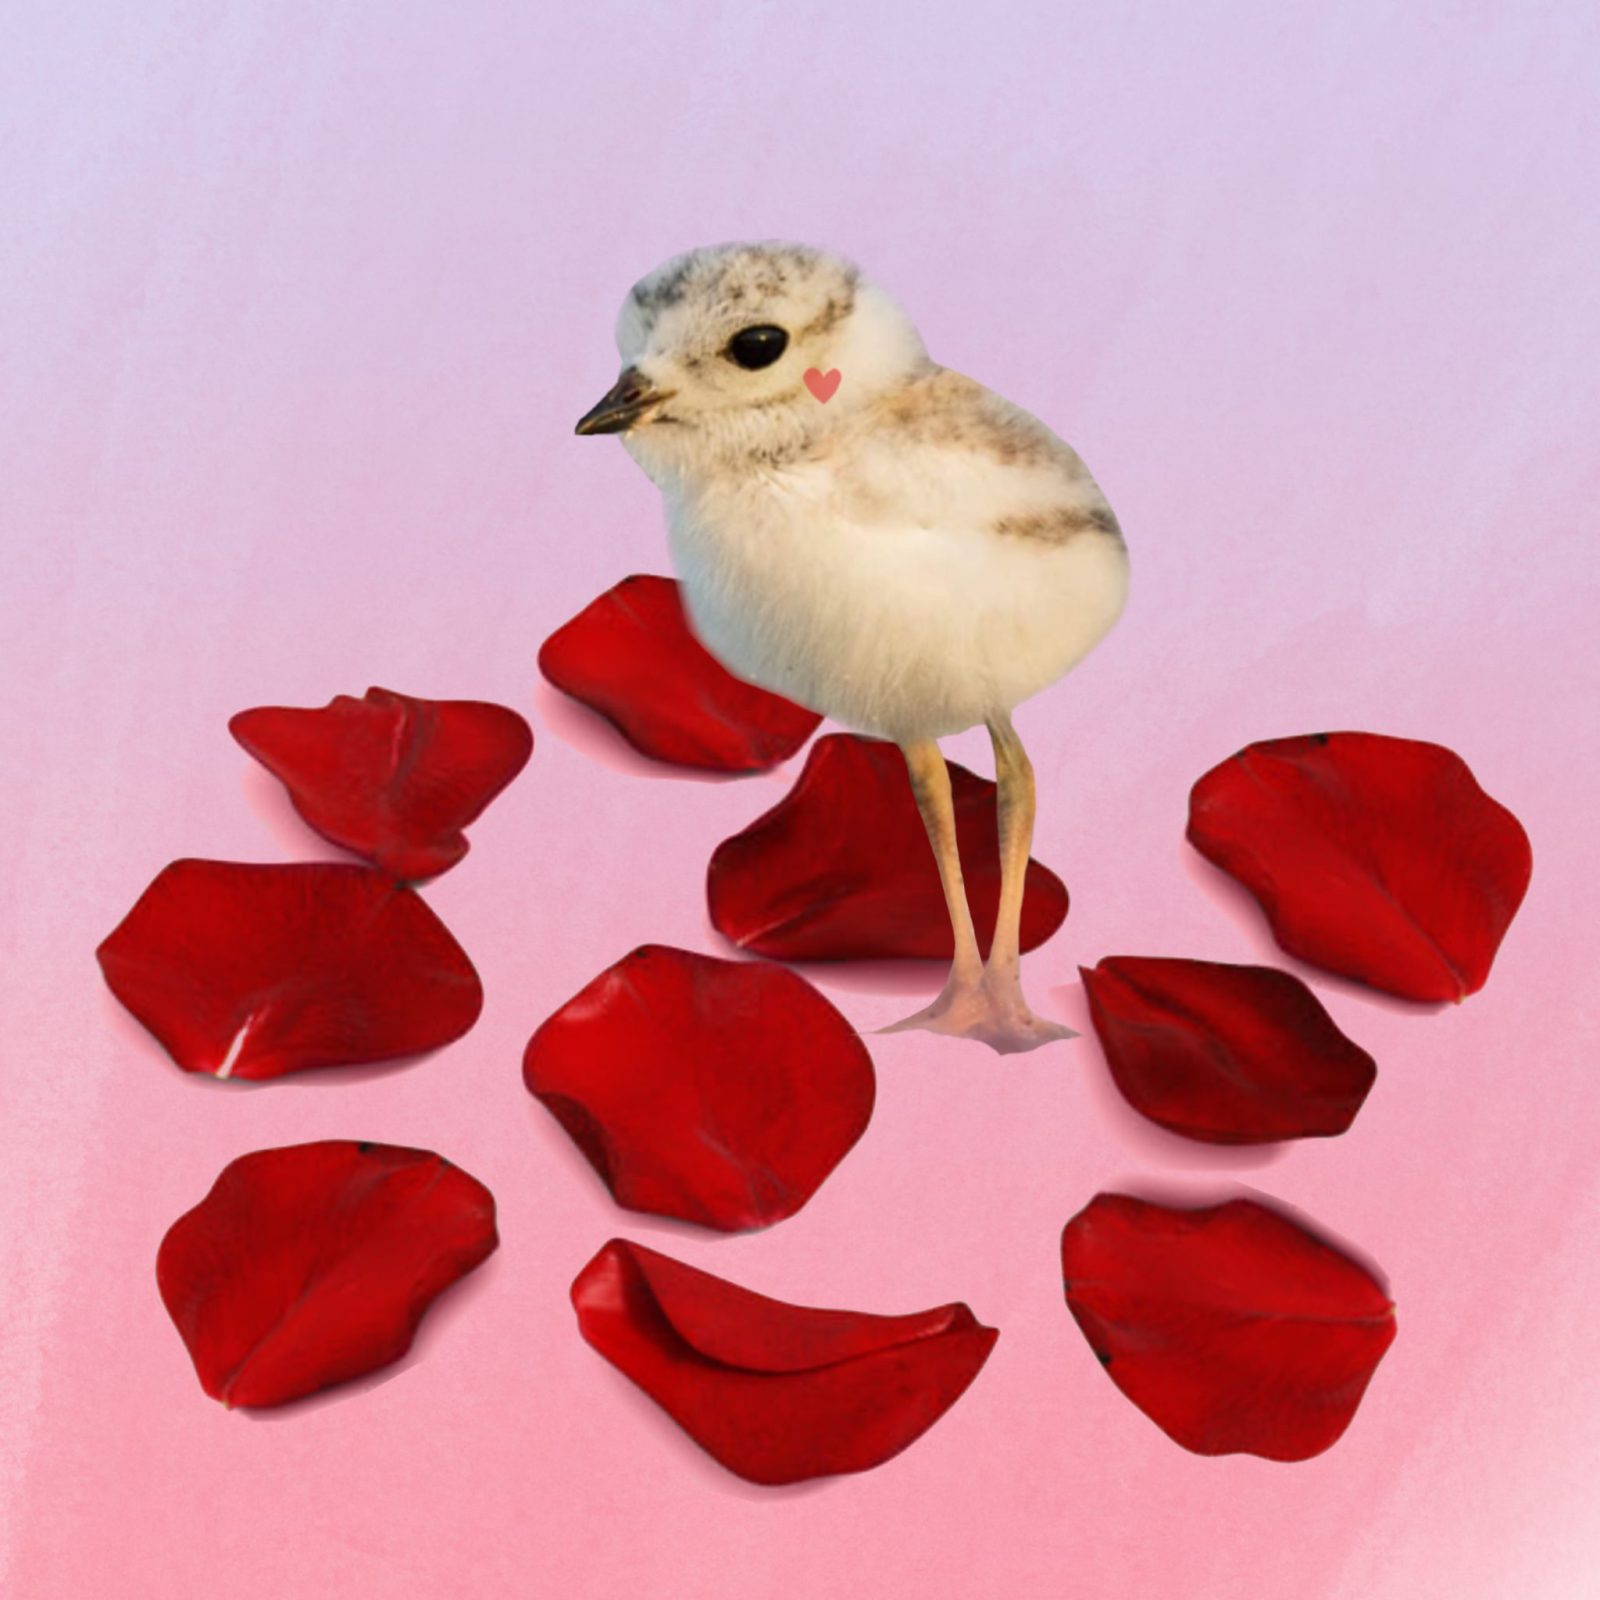 Collage of a baby chick standing on a pink floor with rose petals around it